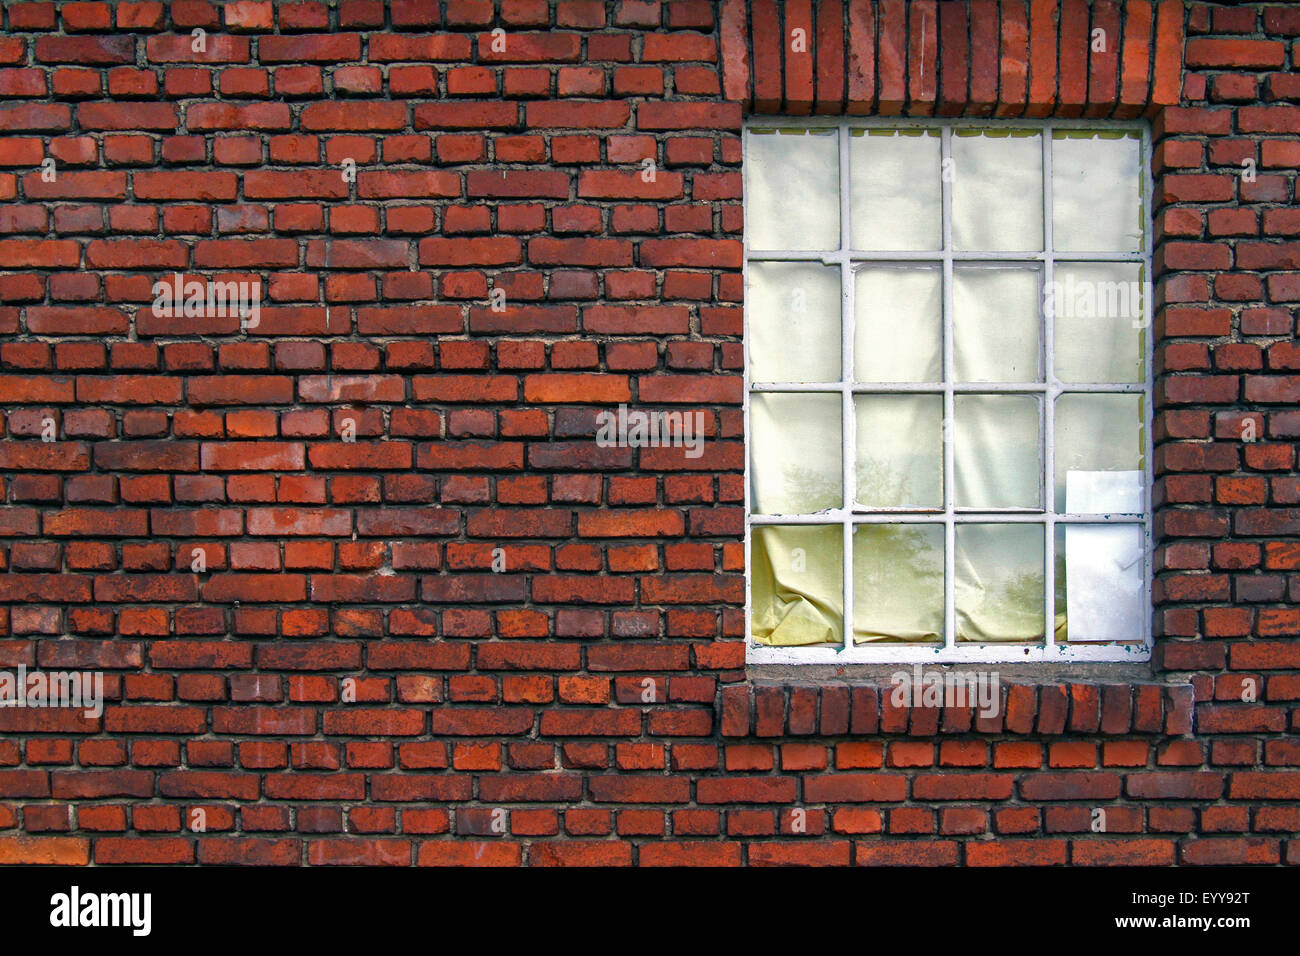 old brick wall with window, Germany Stock Photo